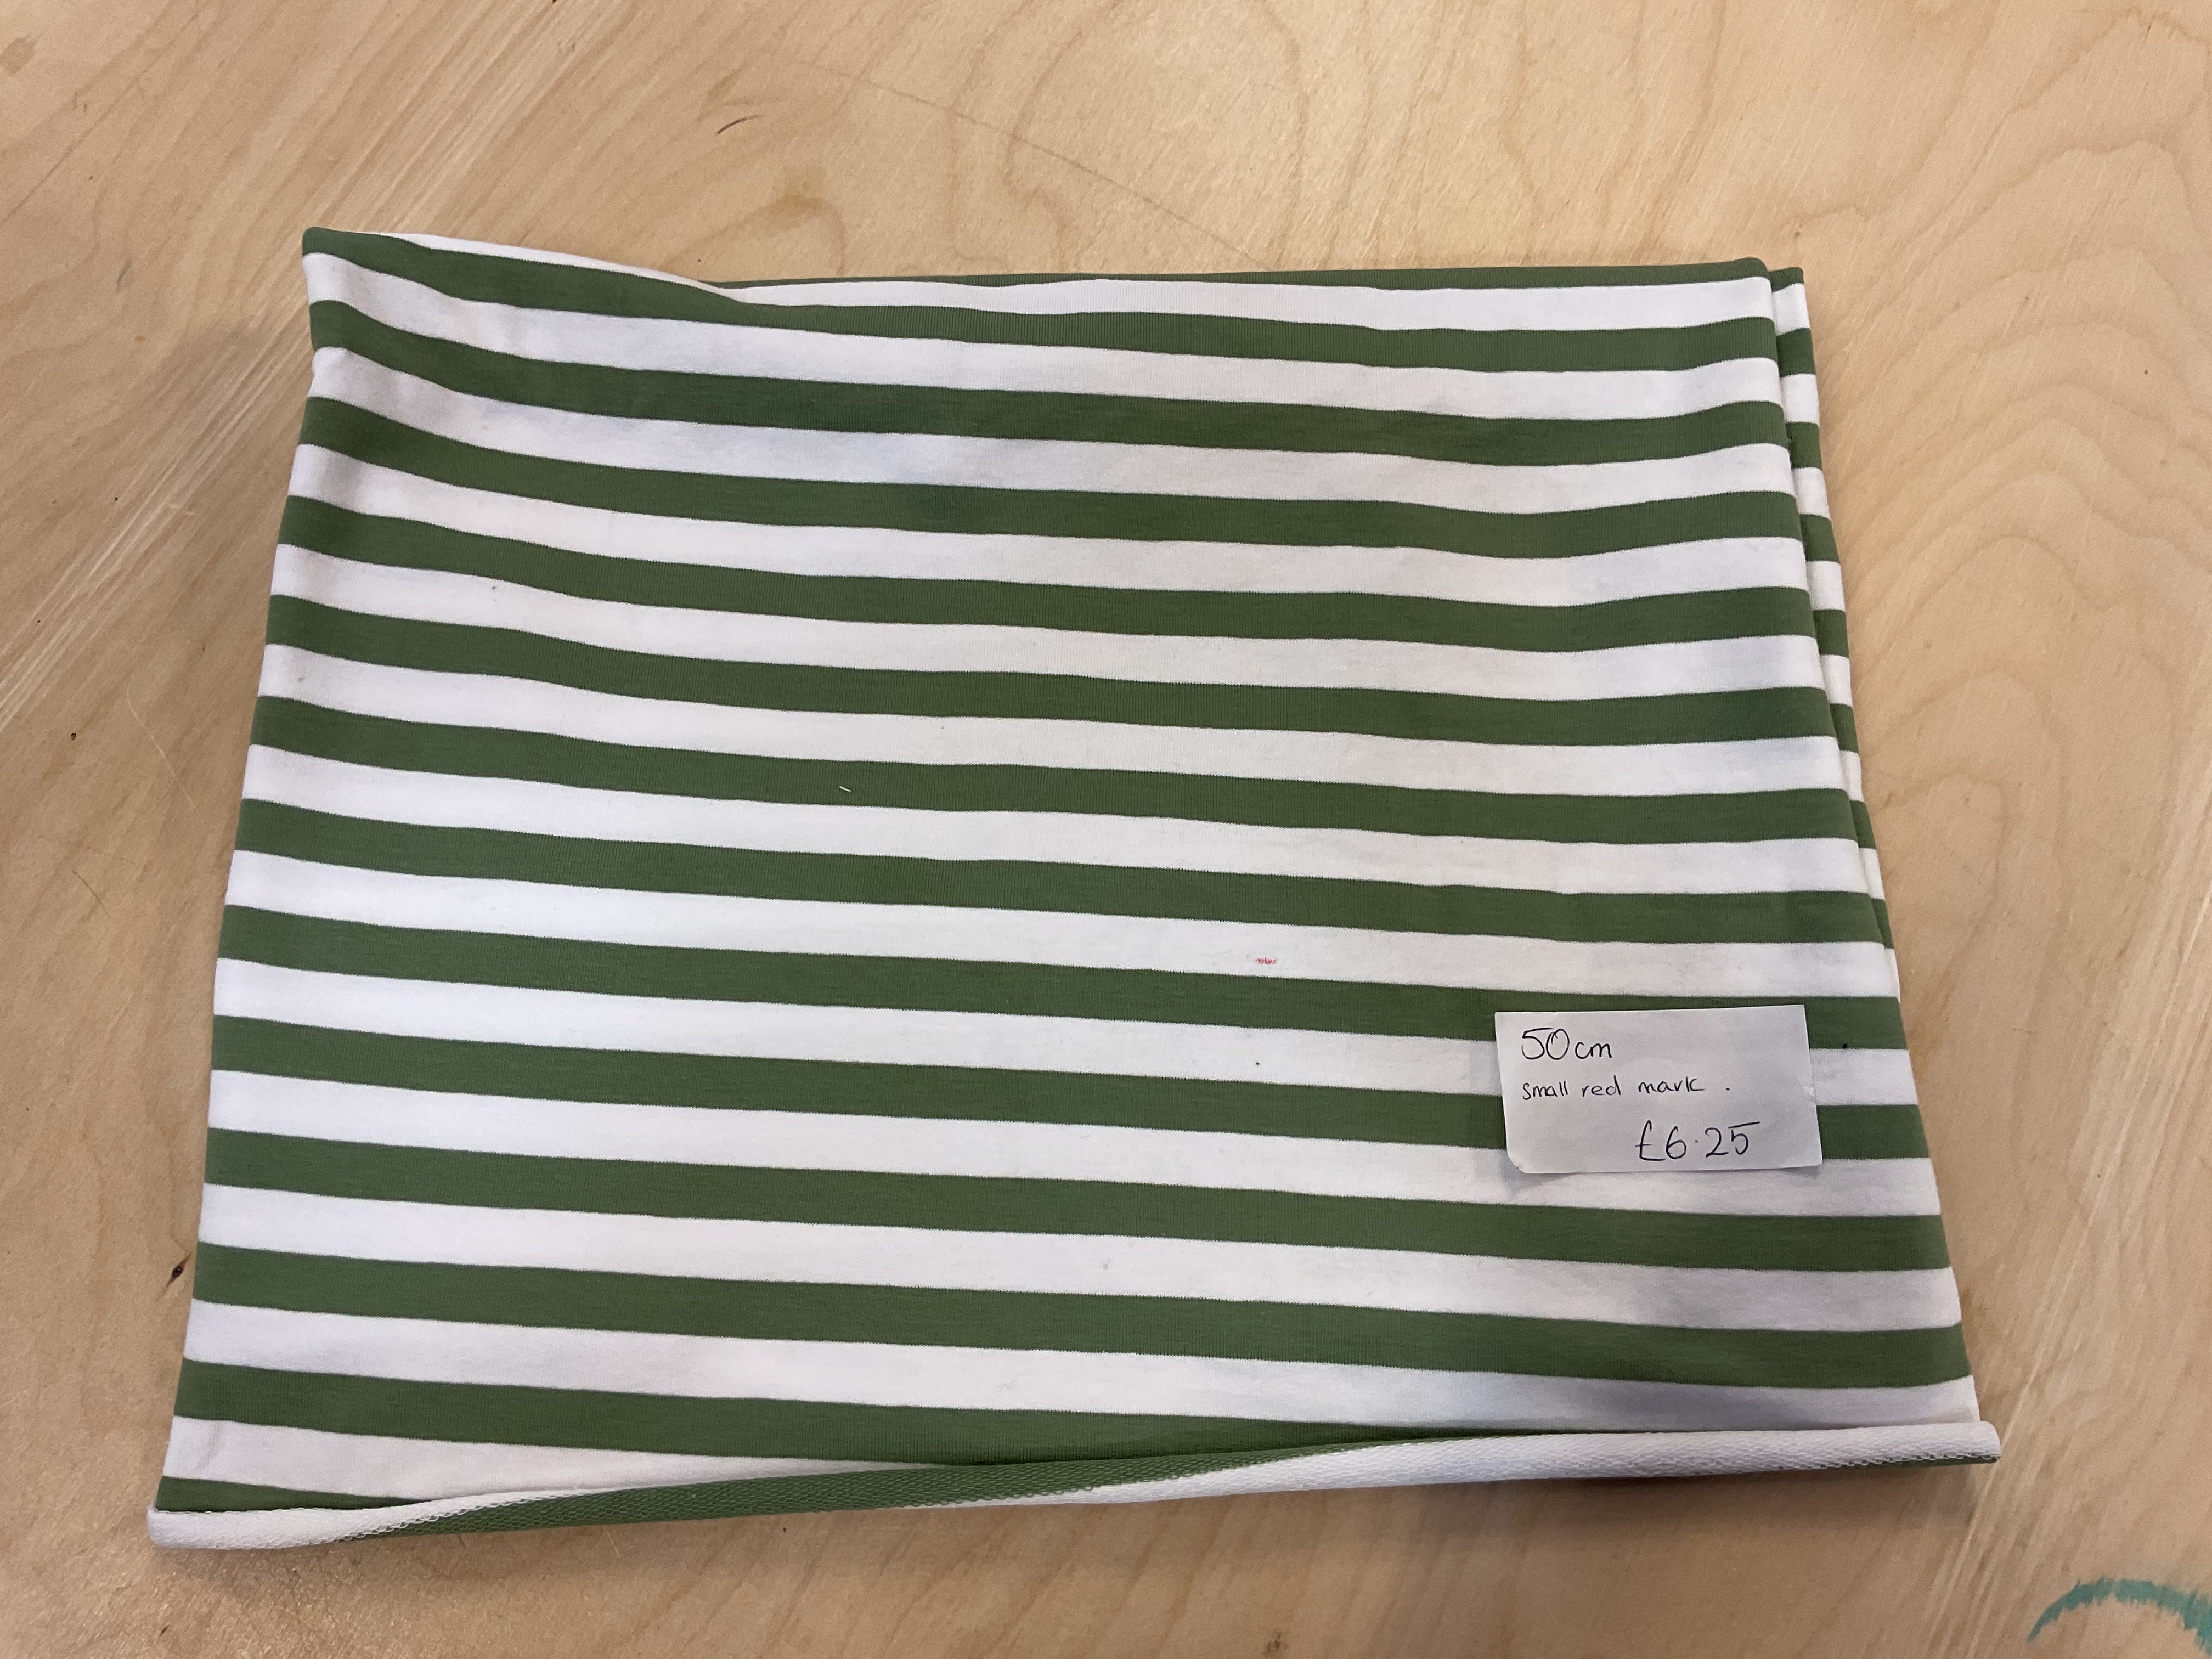 REMNANT  - (MARKED) 50cm green and white striped French terry